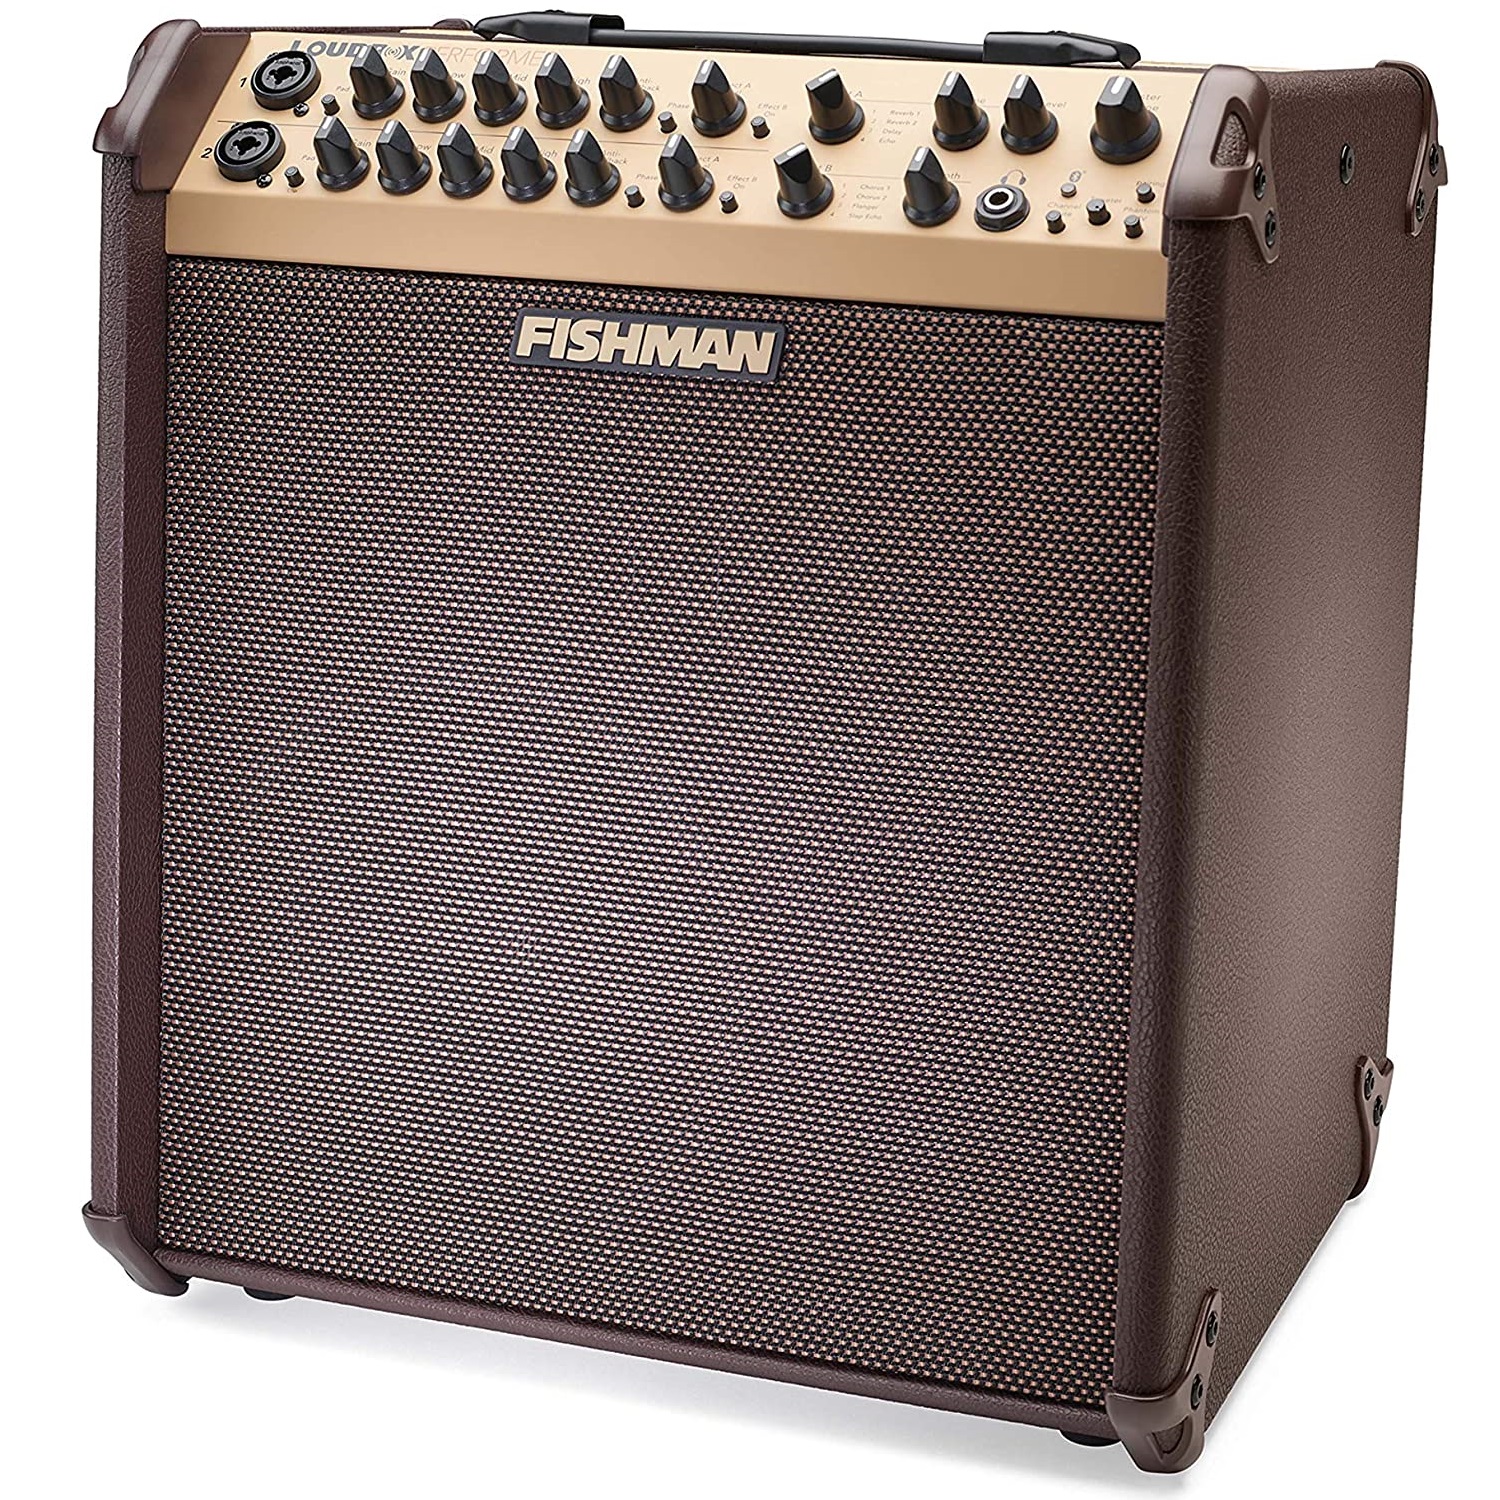 Fishman Loudbox Performer 180W Bluetooth Acoustic Guitar Combo Amp Online price in India